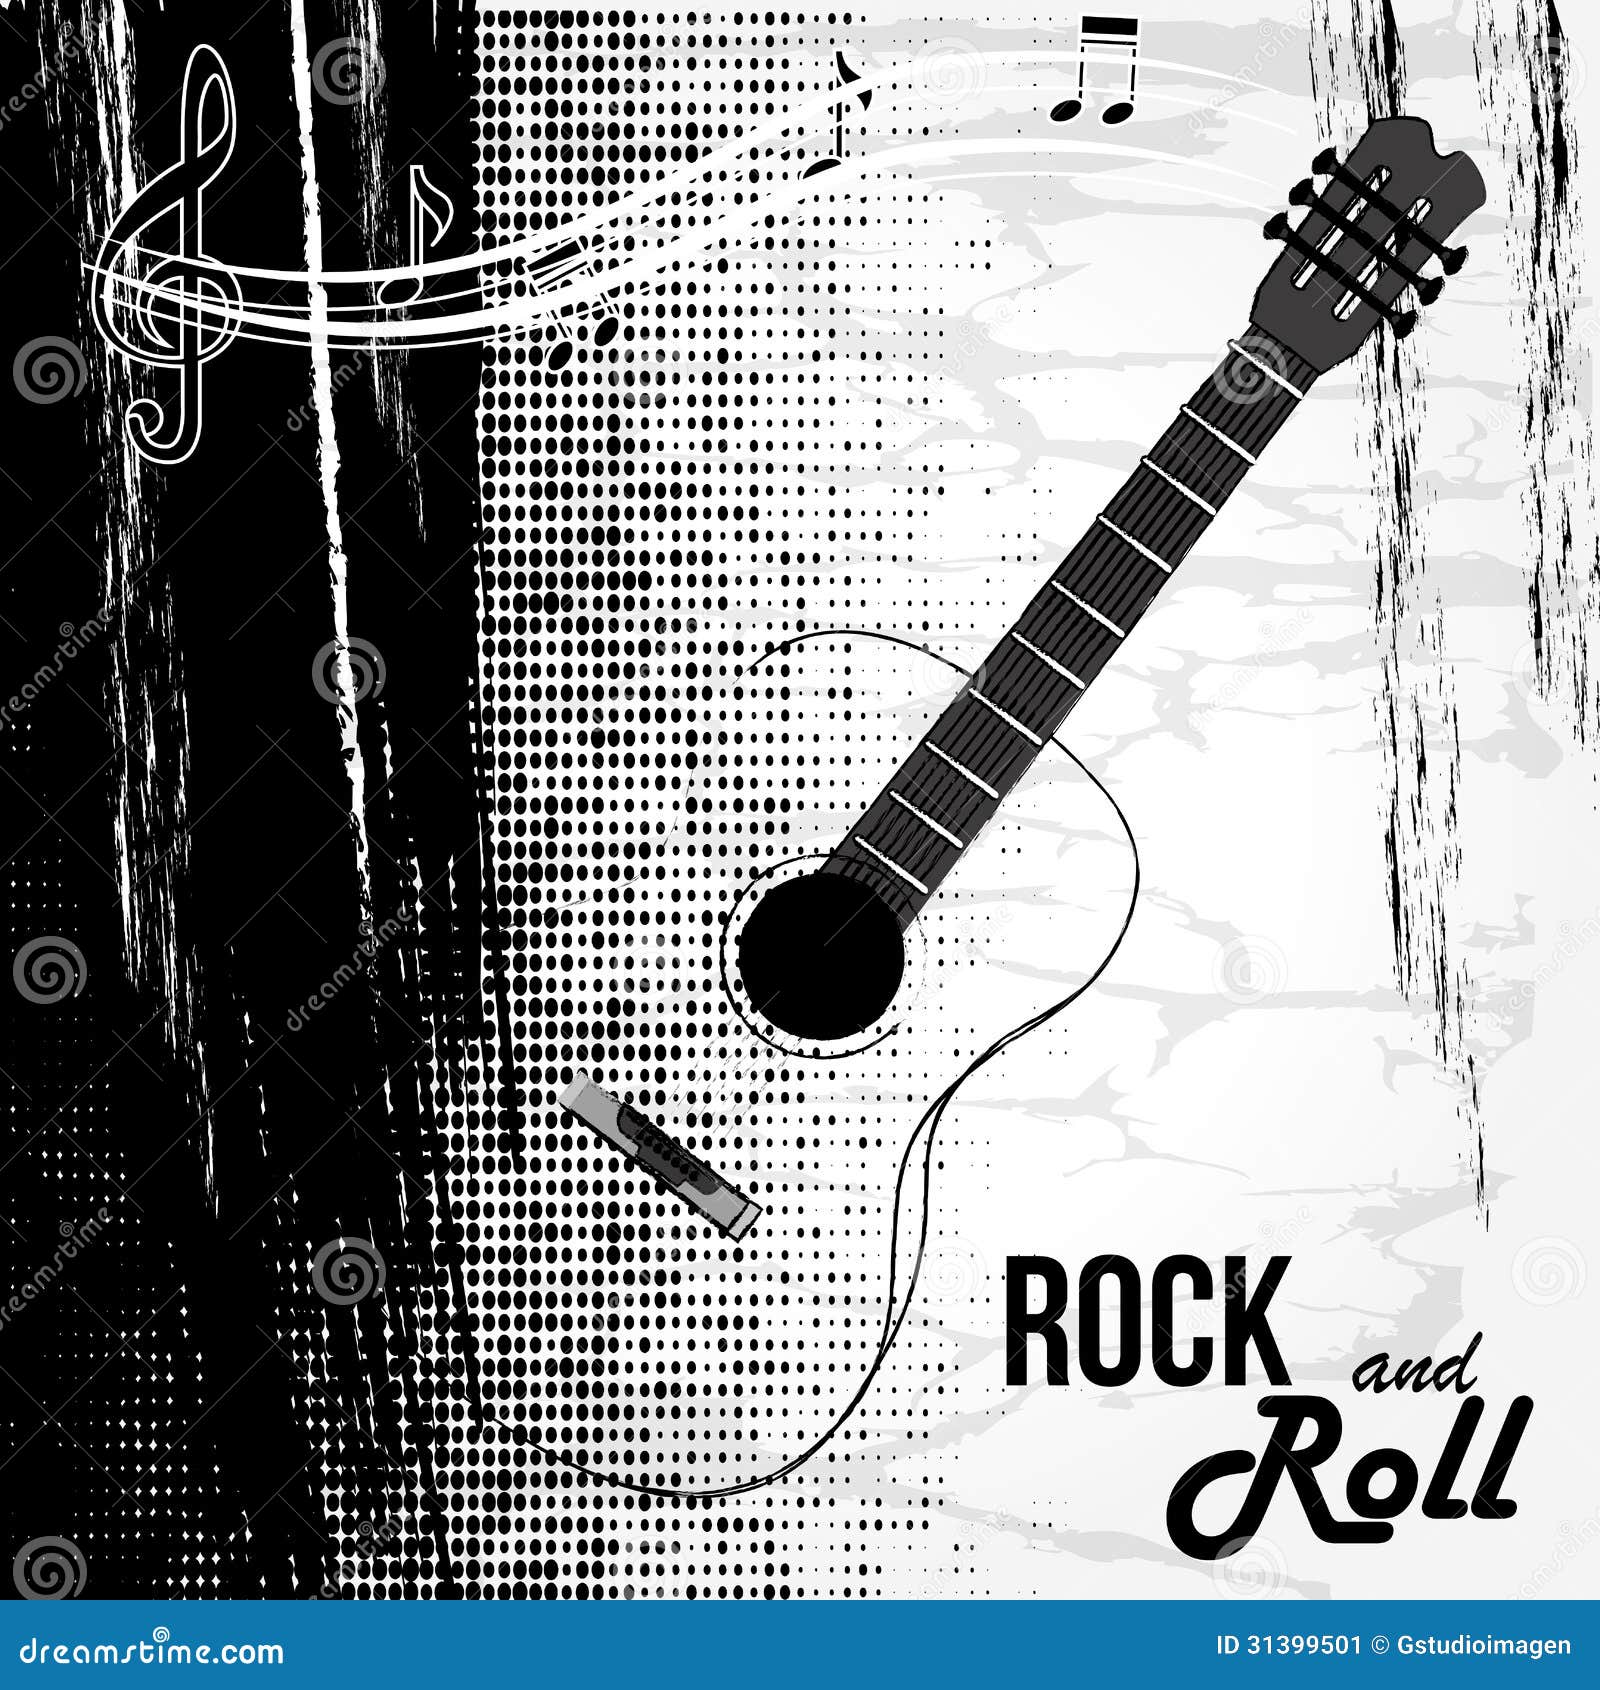 n tumblr roll backgrounds rock Image: 31399501 Image And Roll Design Stock Rock